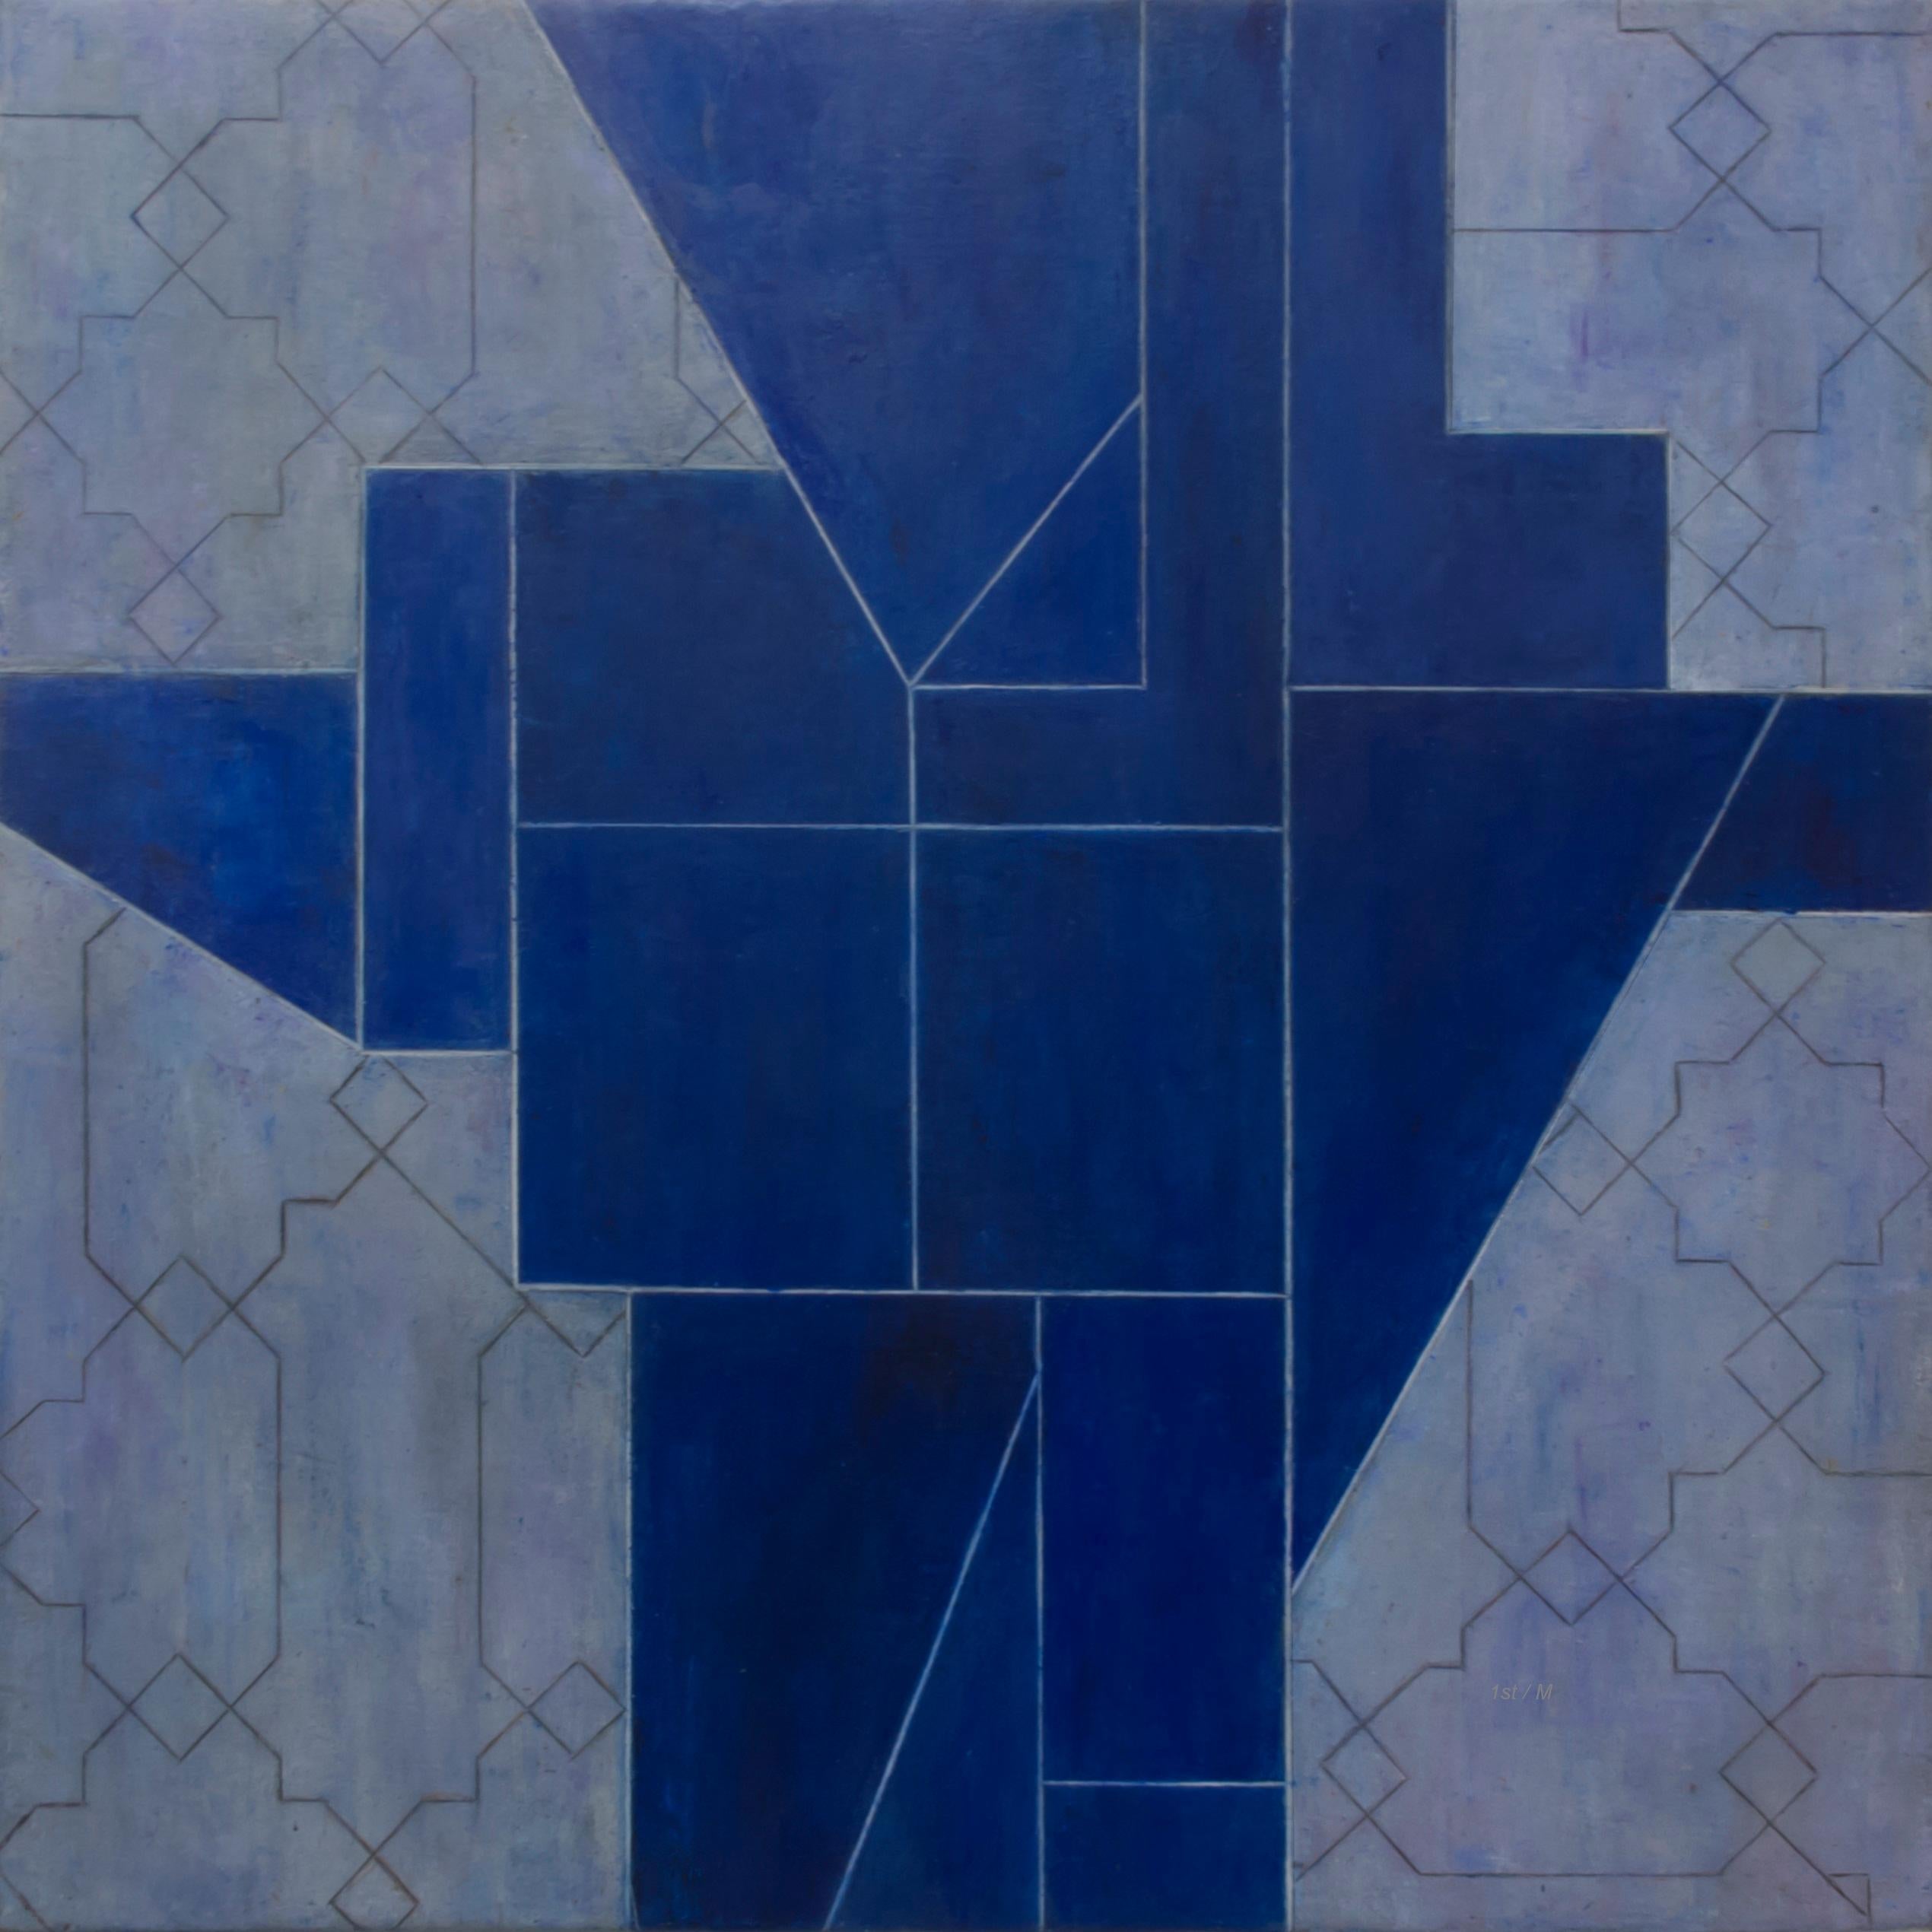 Stephen Cimini Abstract Painting - 32x32x2 in. - Oil painting -Geometric Abstract Oil Painting "Walking on Water"